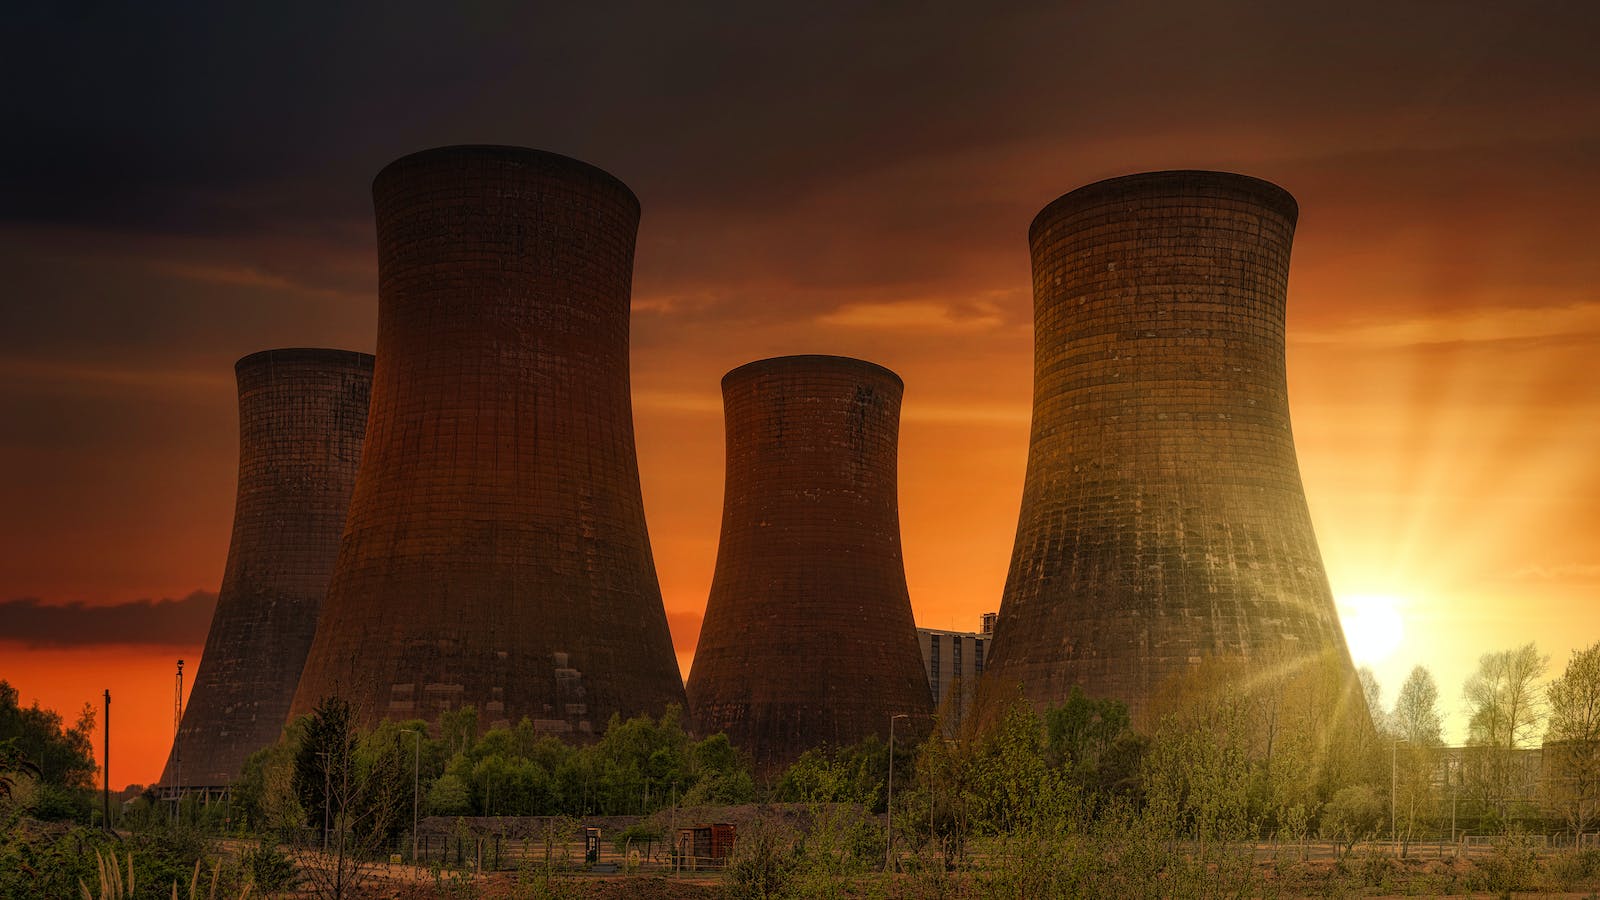 Exterior of huge cooling towers located in contemporary atomic power plant against bright setting sun under dramatic dark sky